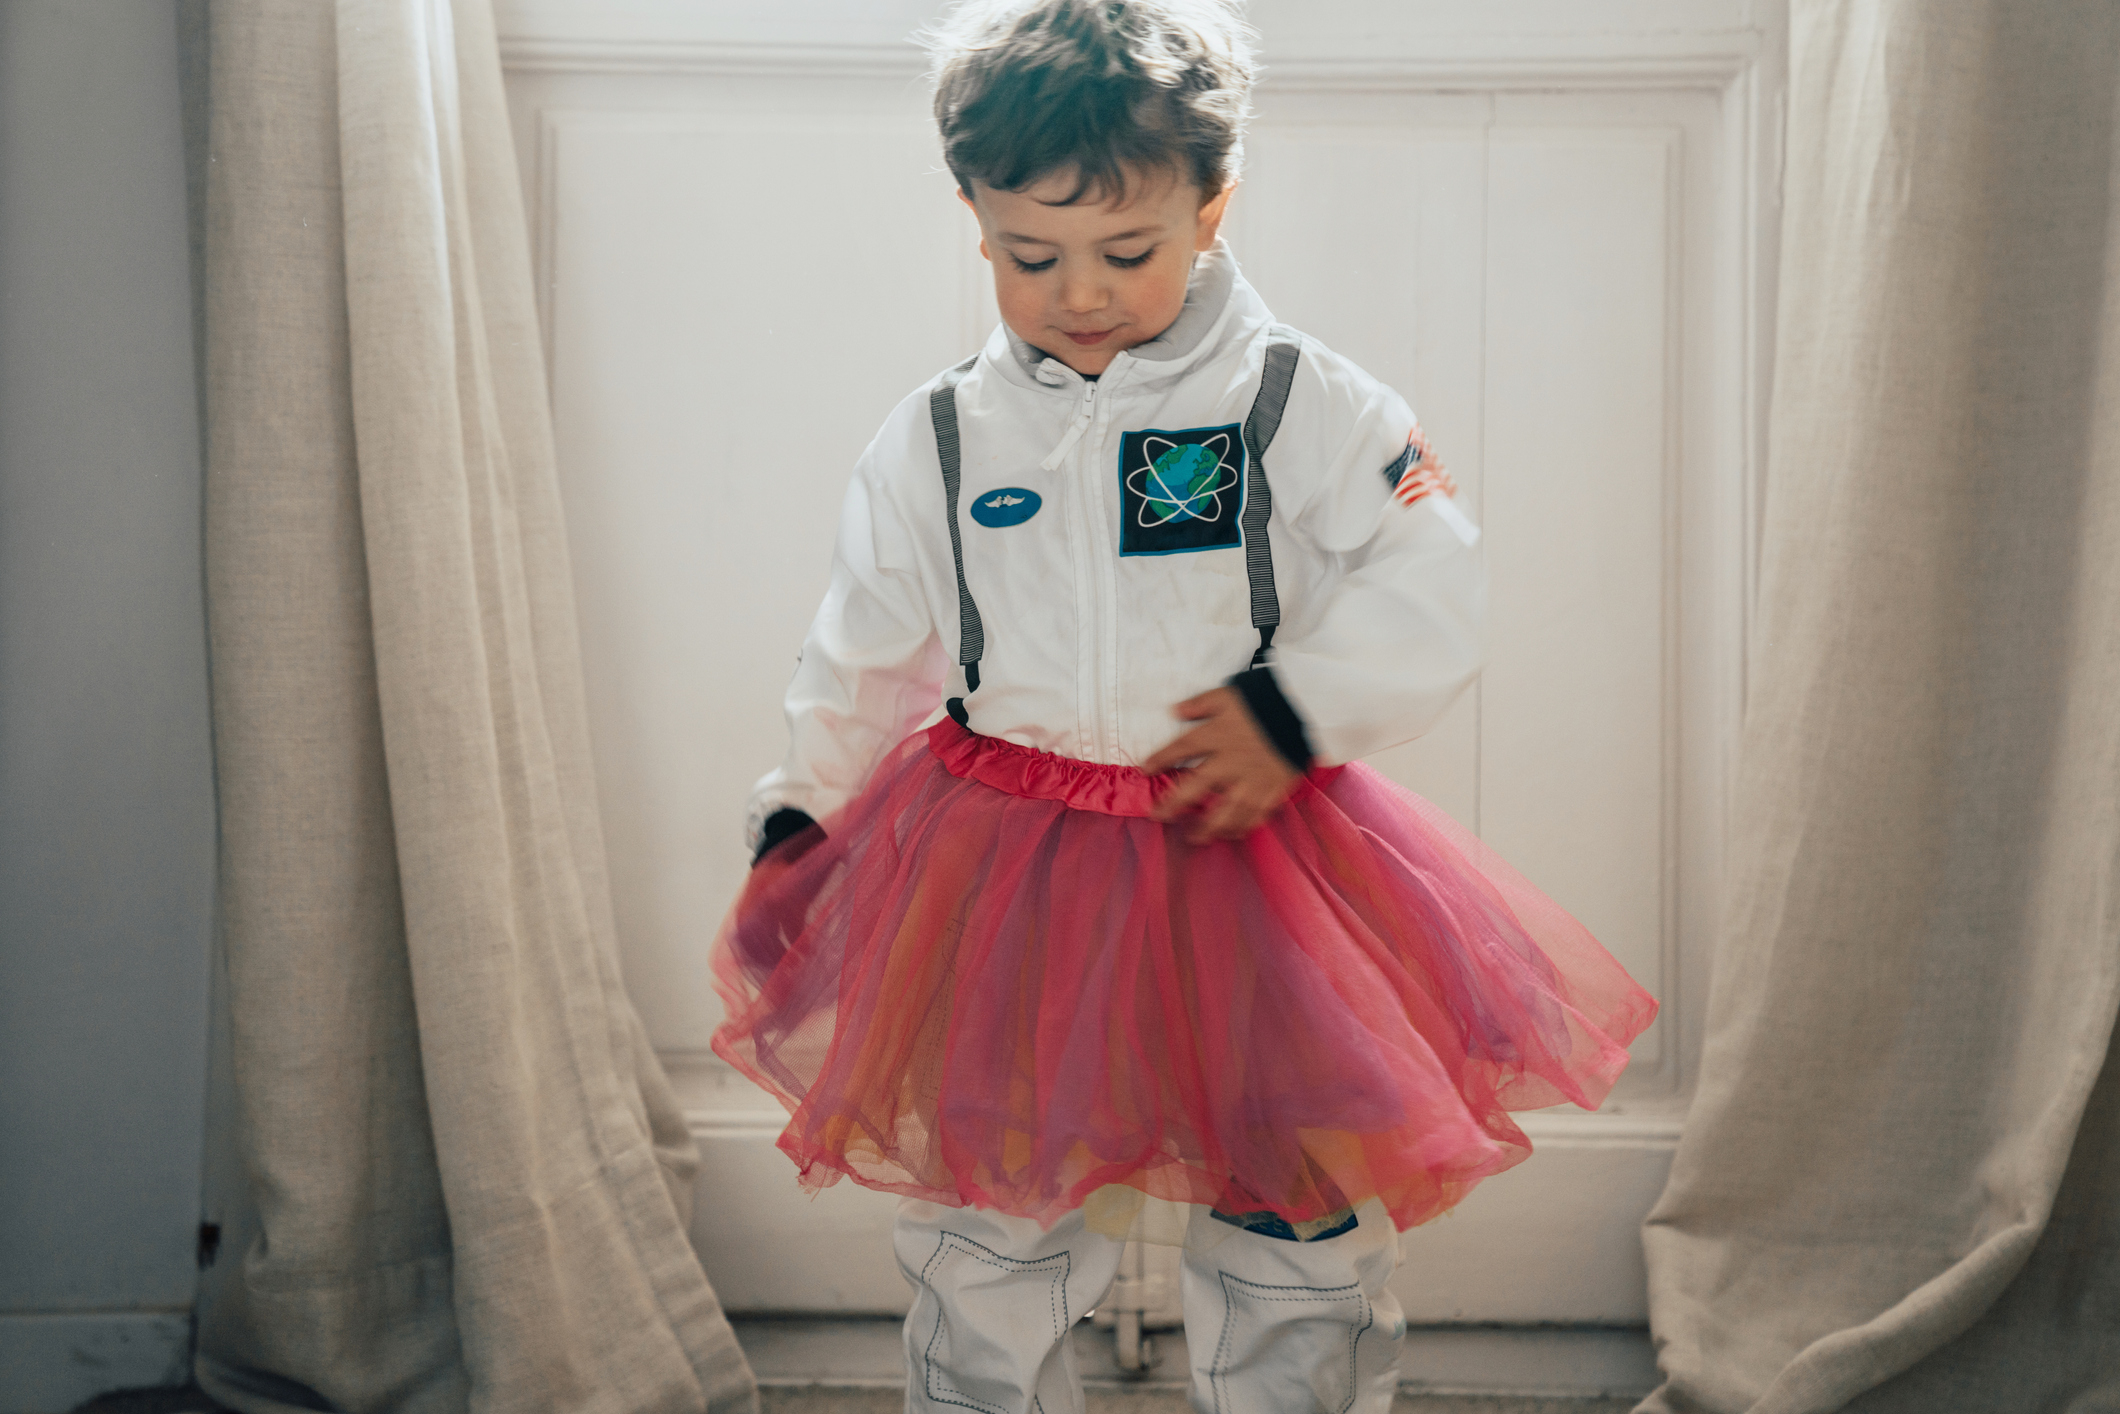 A toddler dressed in a space suit and a tutu